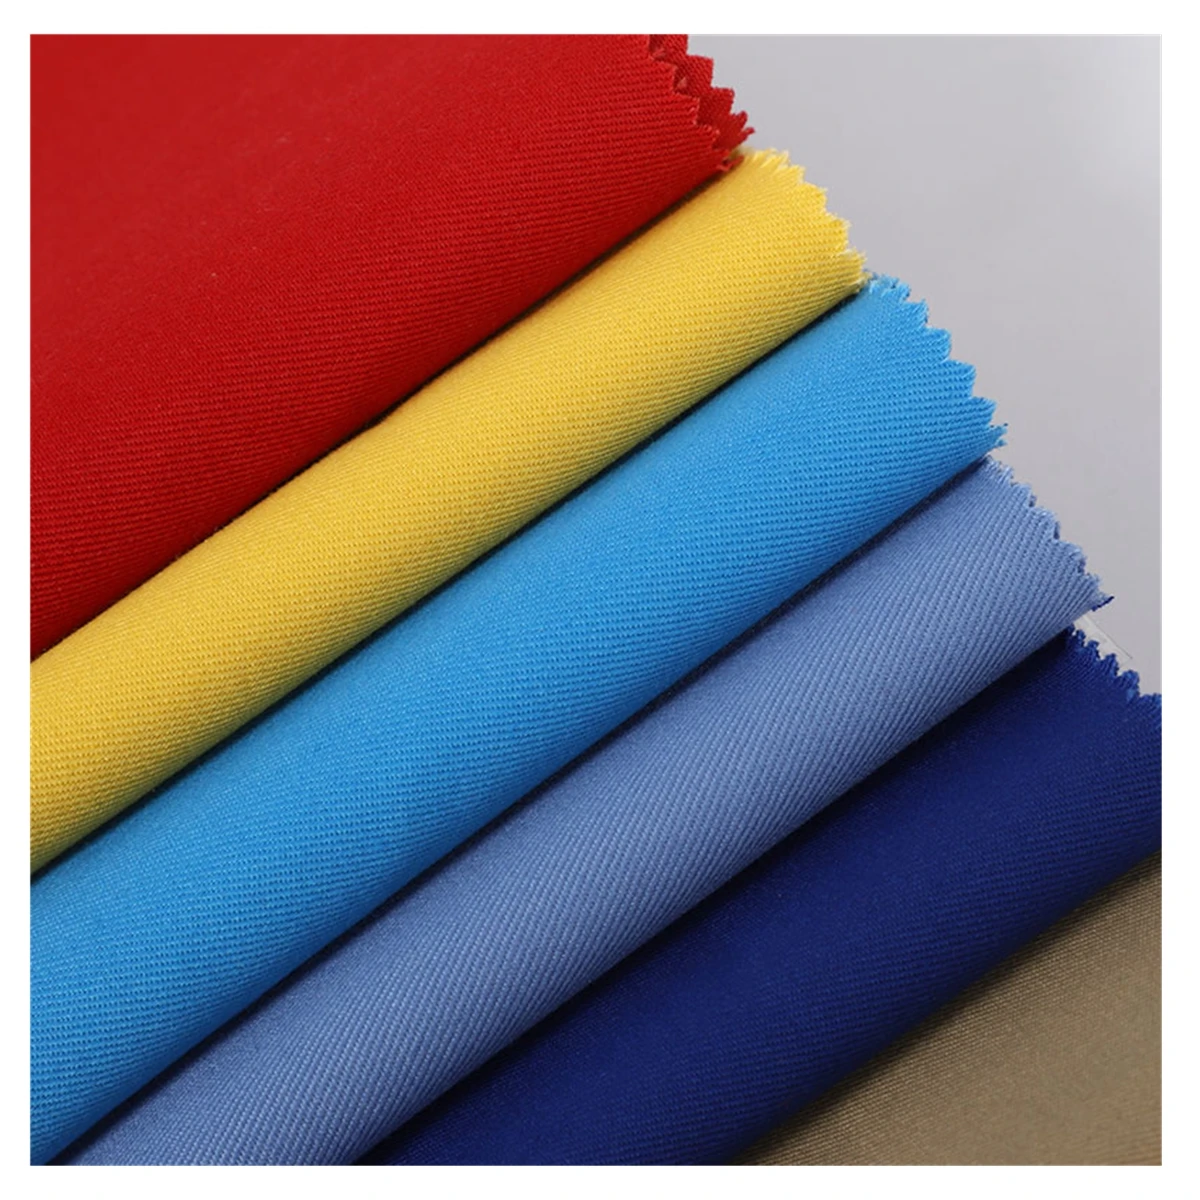 Cotton Nylon Flame Retardant Anti Uv Fabric For Flame Resistant Upf 50+ Clothing Ul Certificated - Buy Upf 50+ Fabric,Flame Retardant Fabric,Flame Anti Uv Fabric Product on Alibaba.com